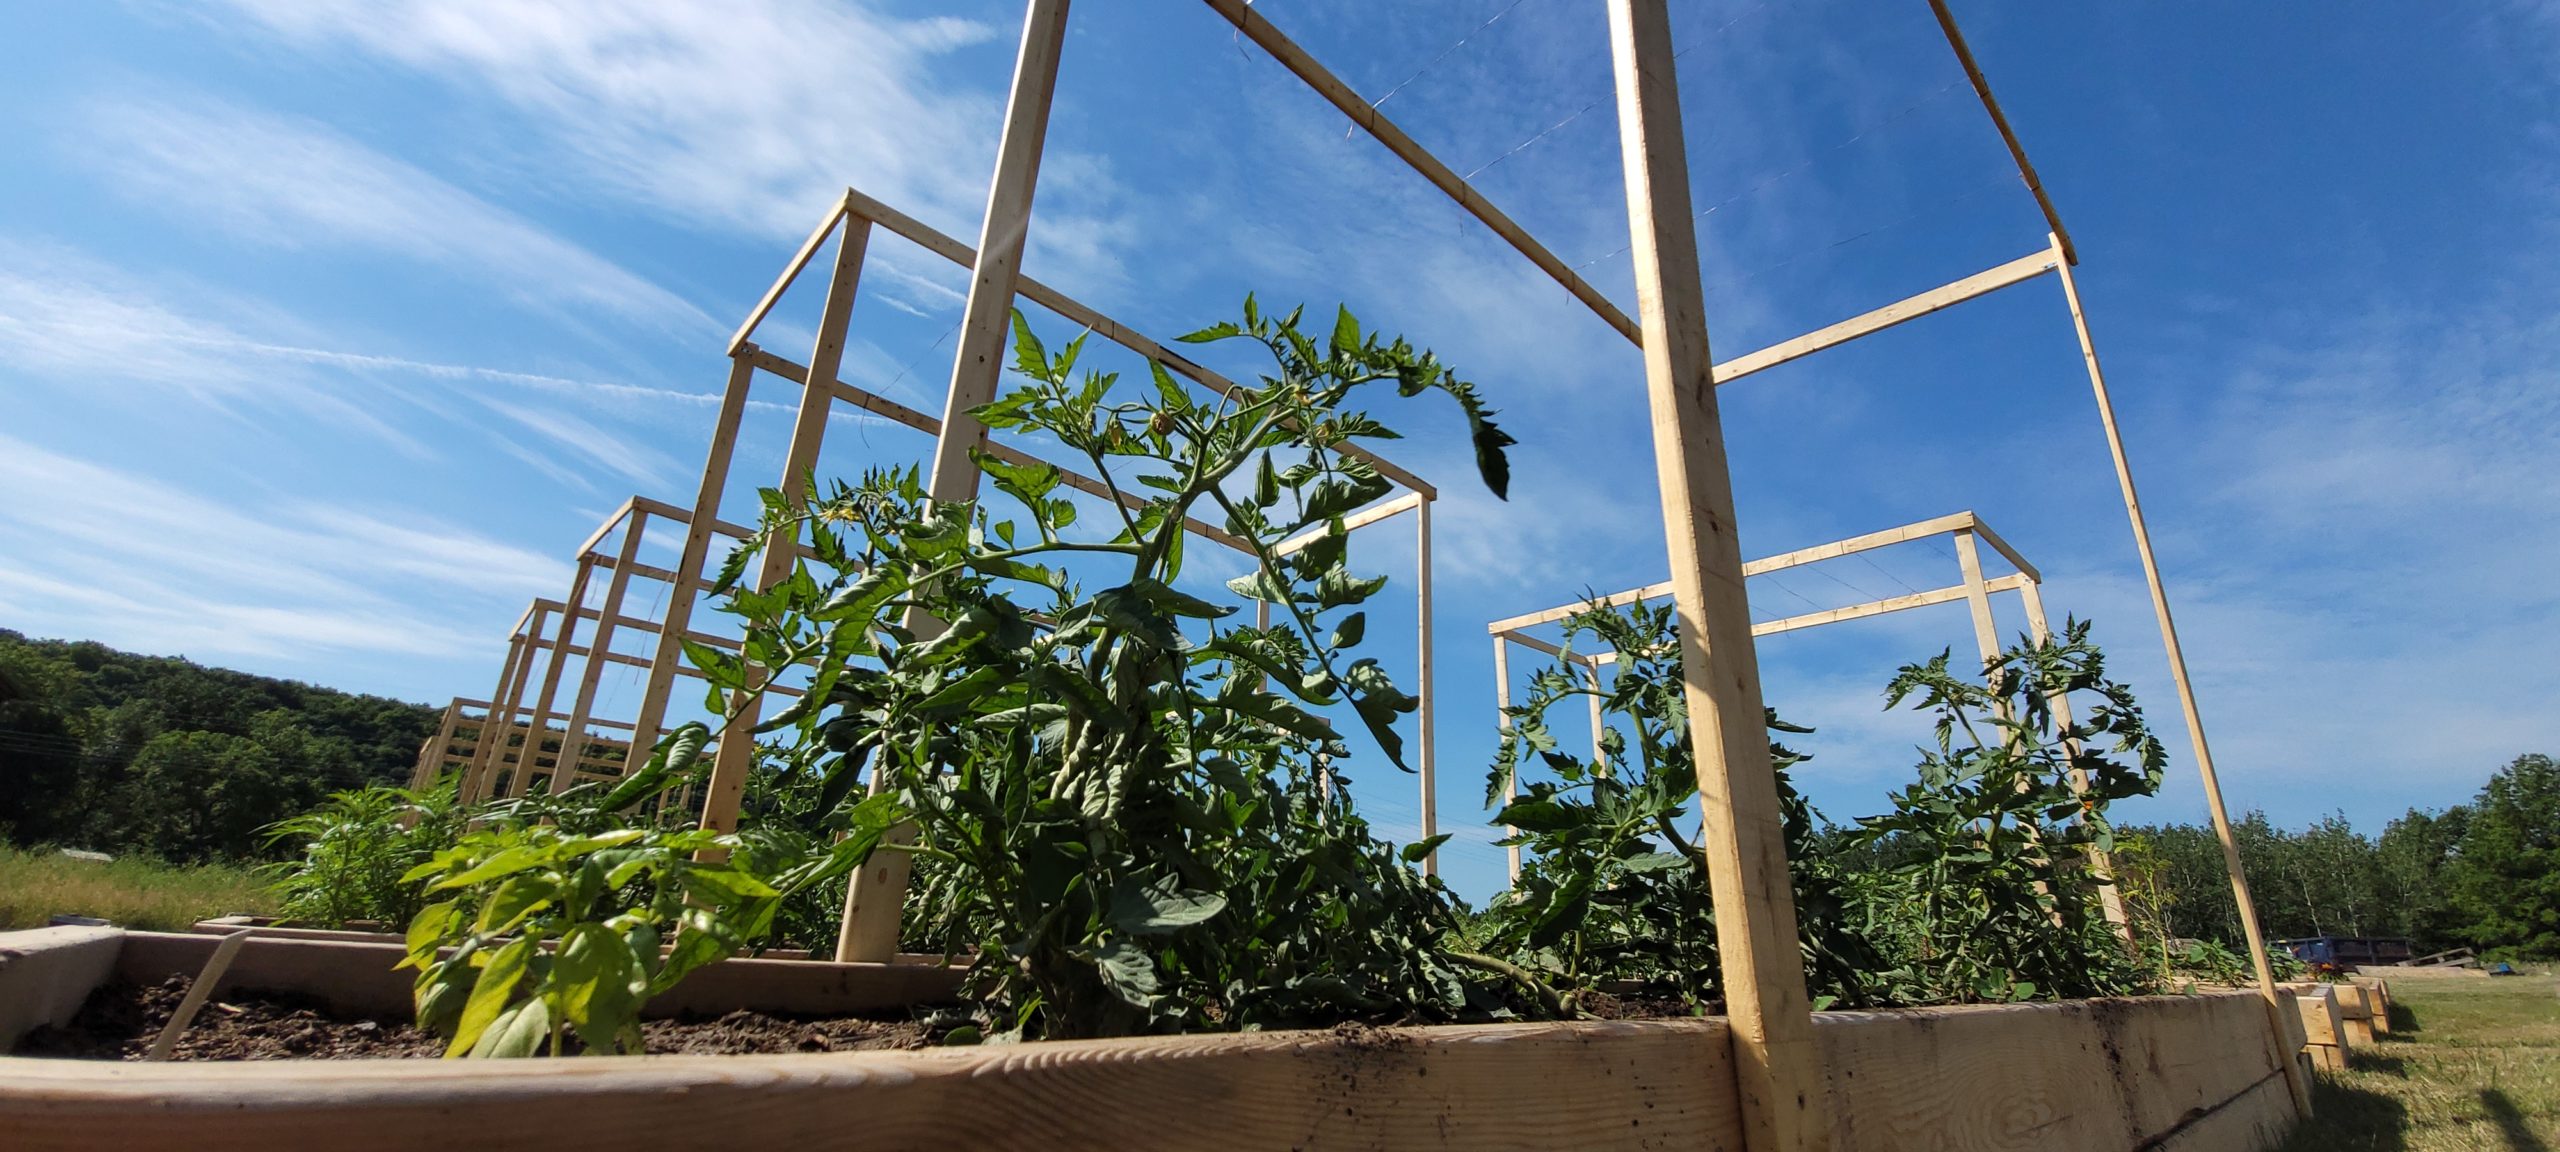 tomatoes growing on a homemade trellis in a community garden